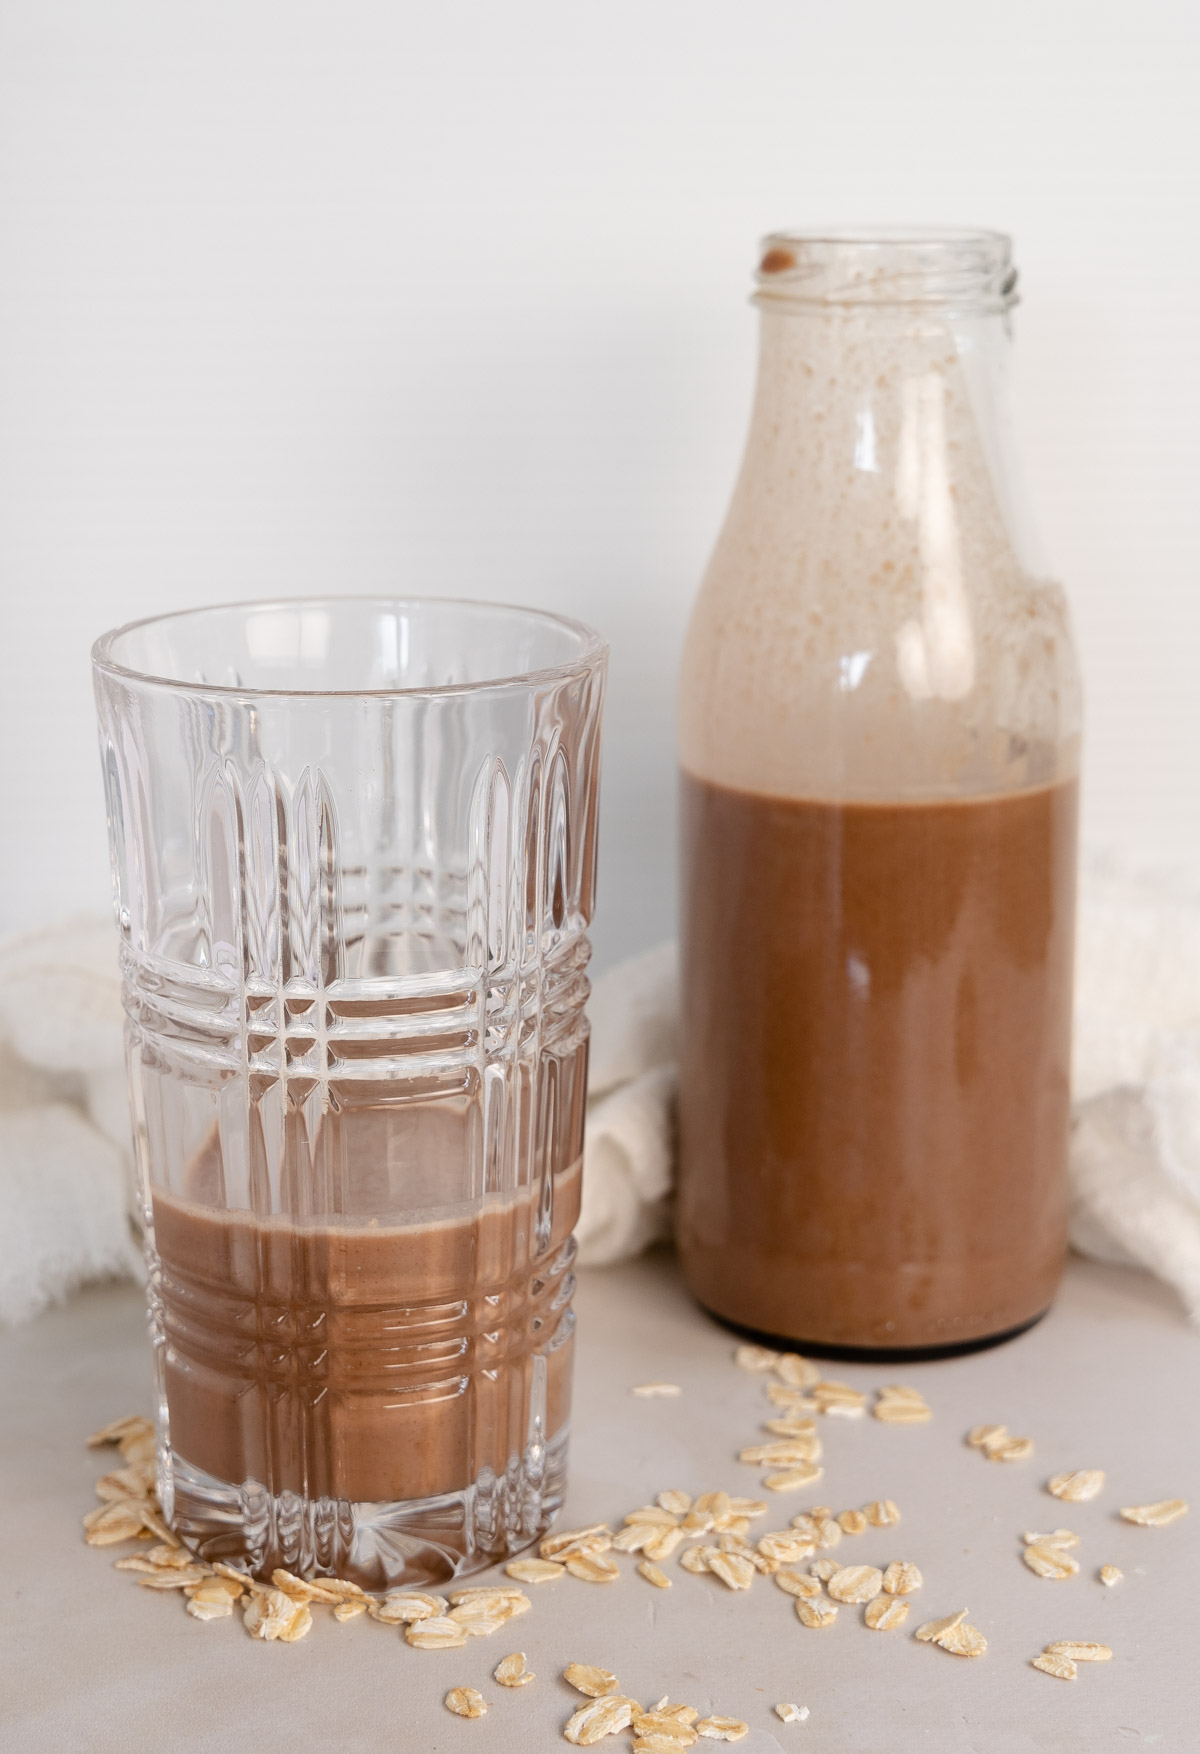 a glass cup and bottle filled with choc milk